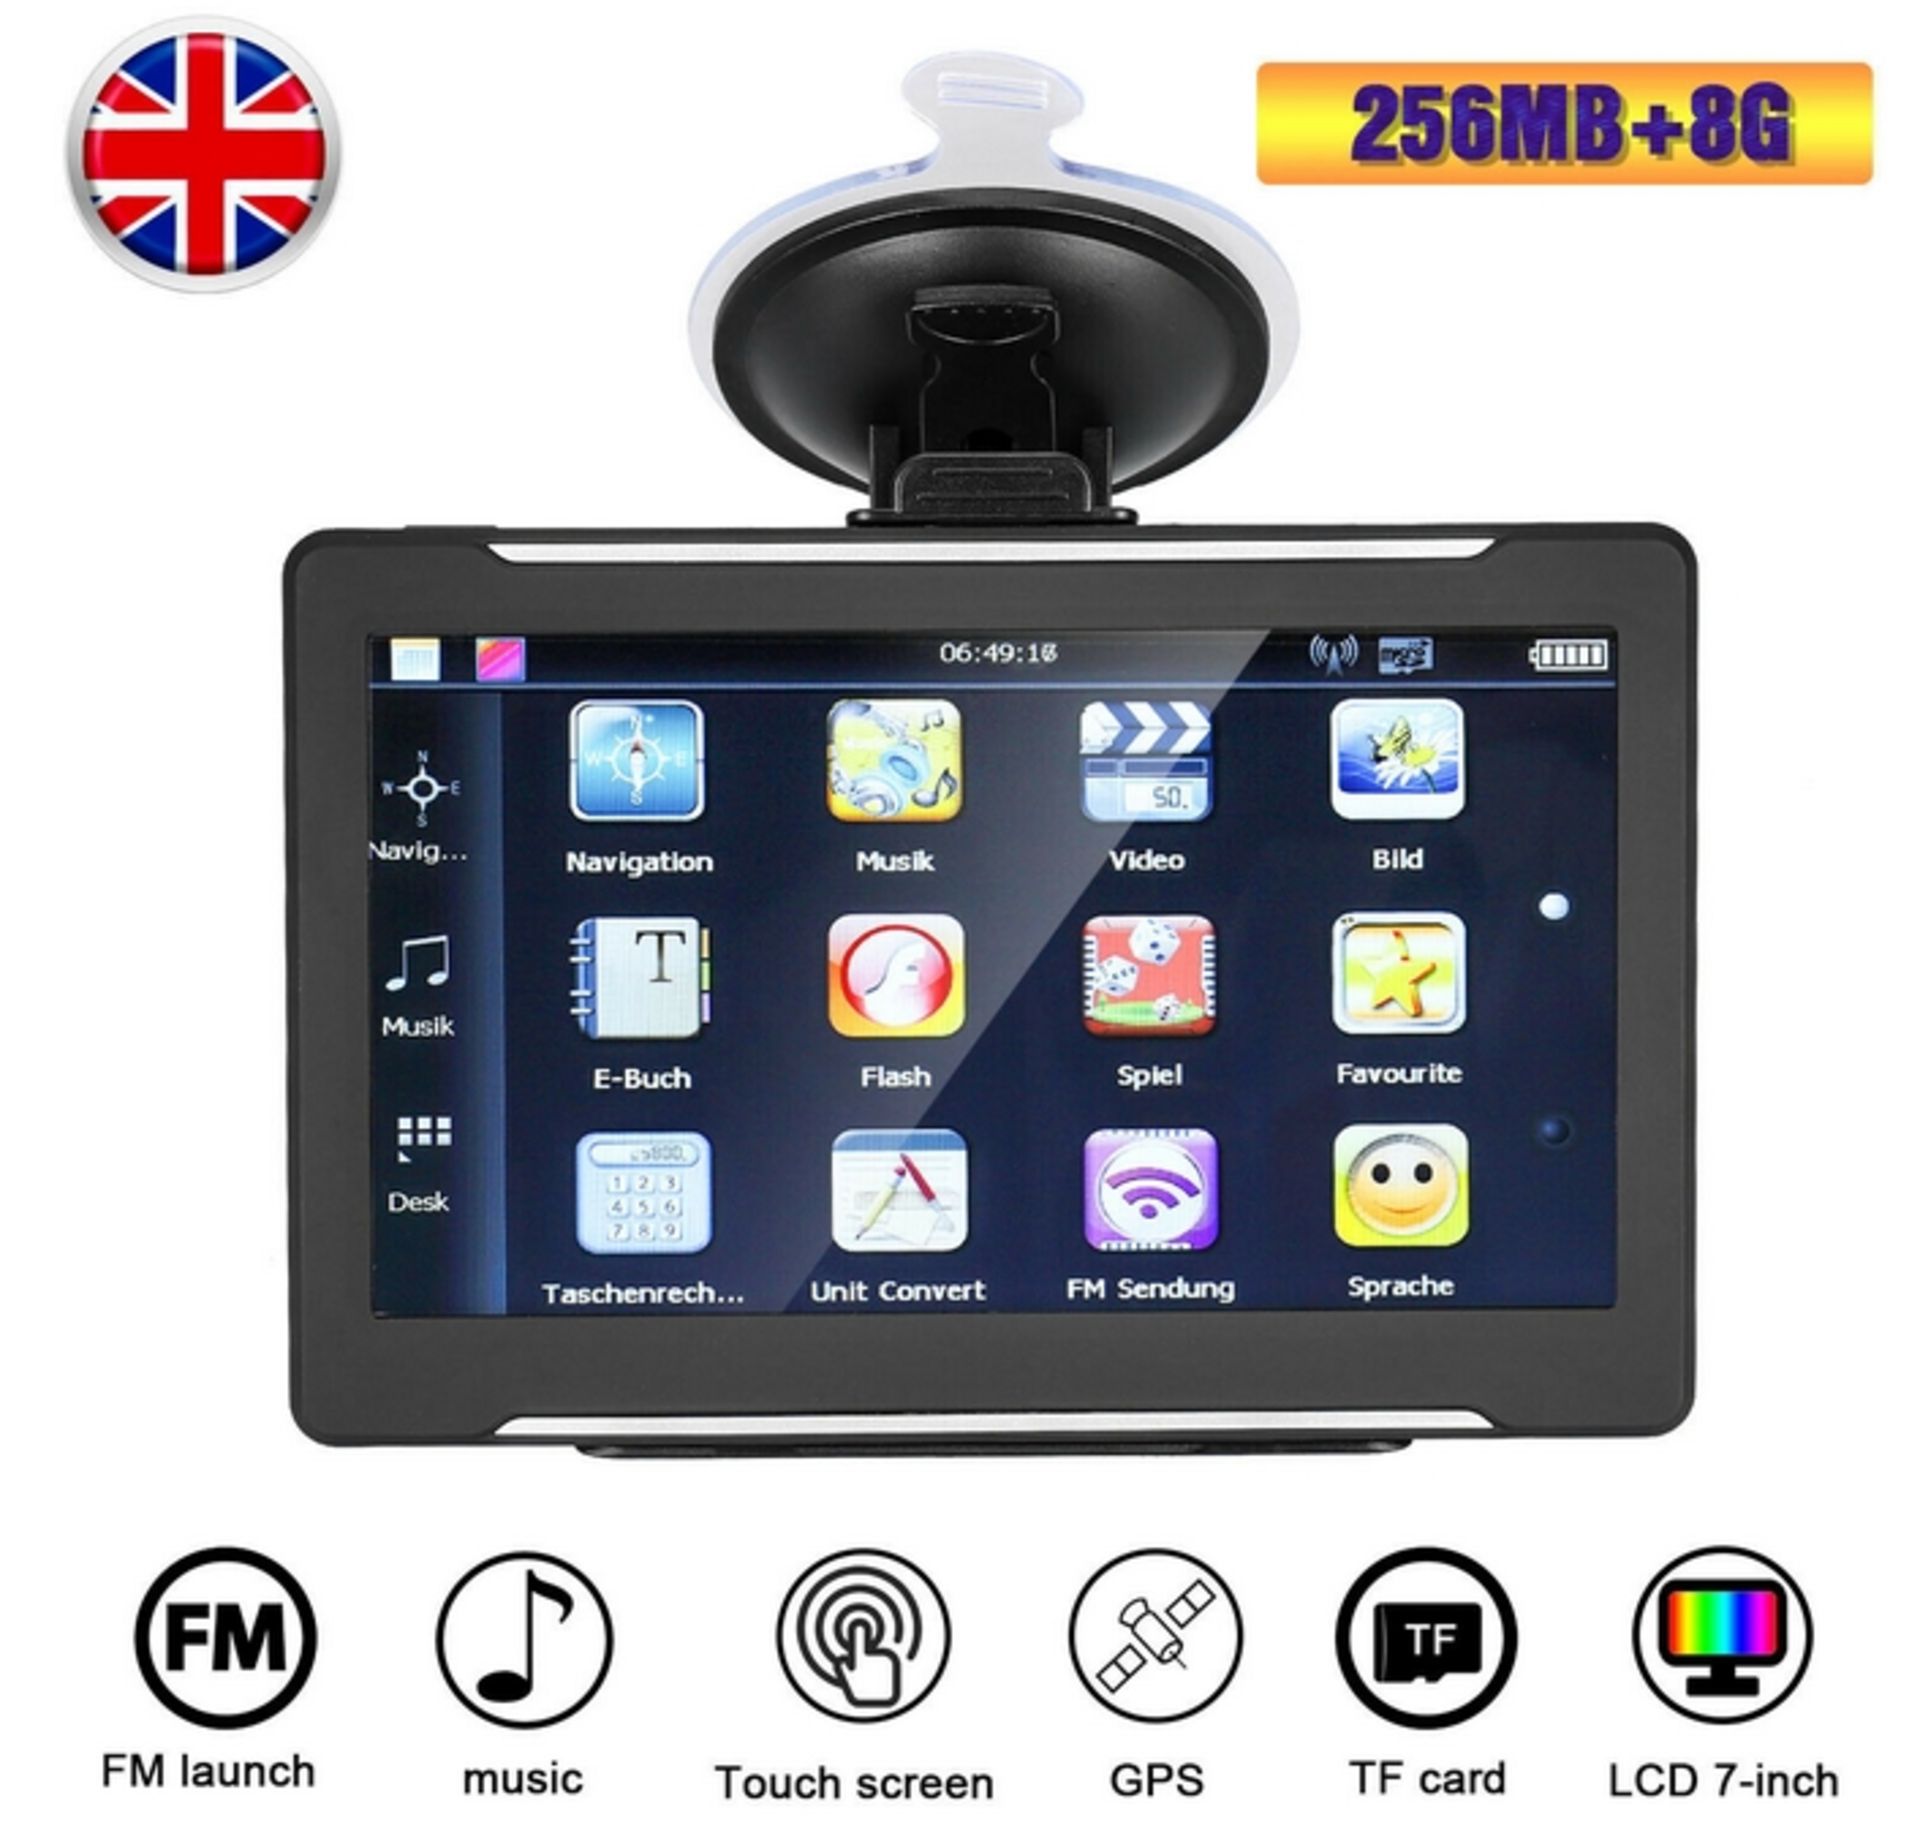 Sat Nav Multimedia System, Excellent Quality And Easy To Use. - Bild 3 aus 3